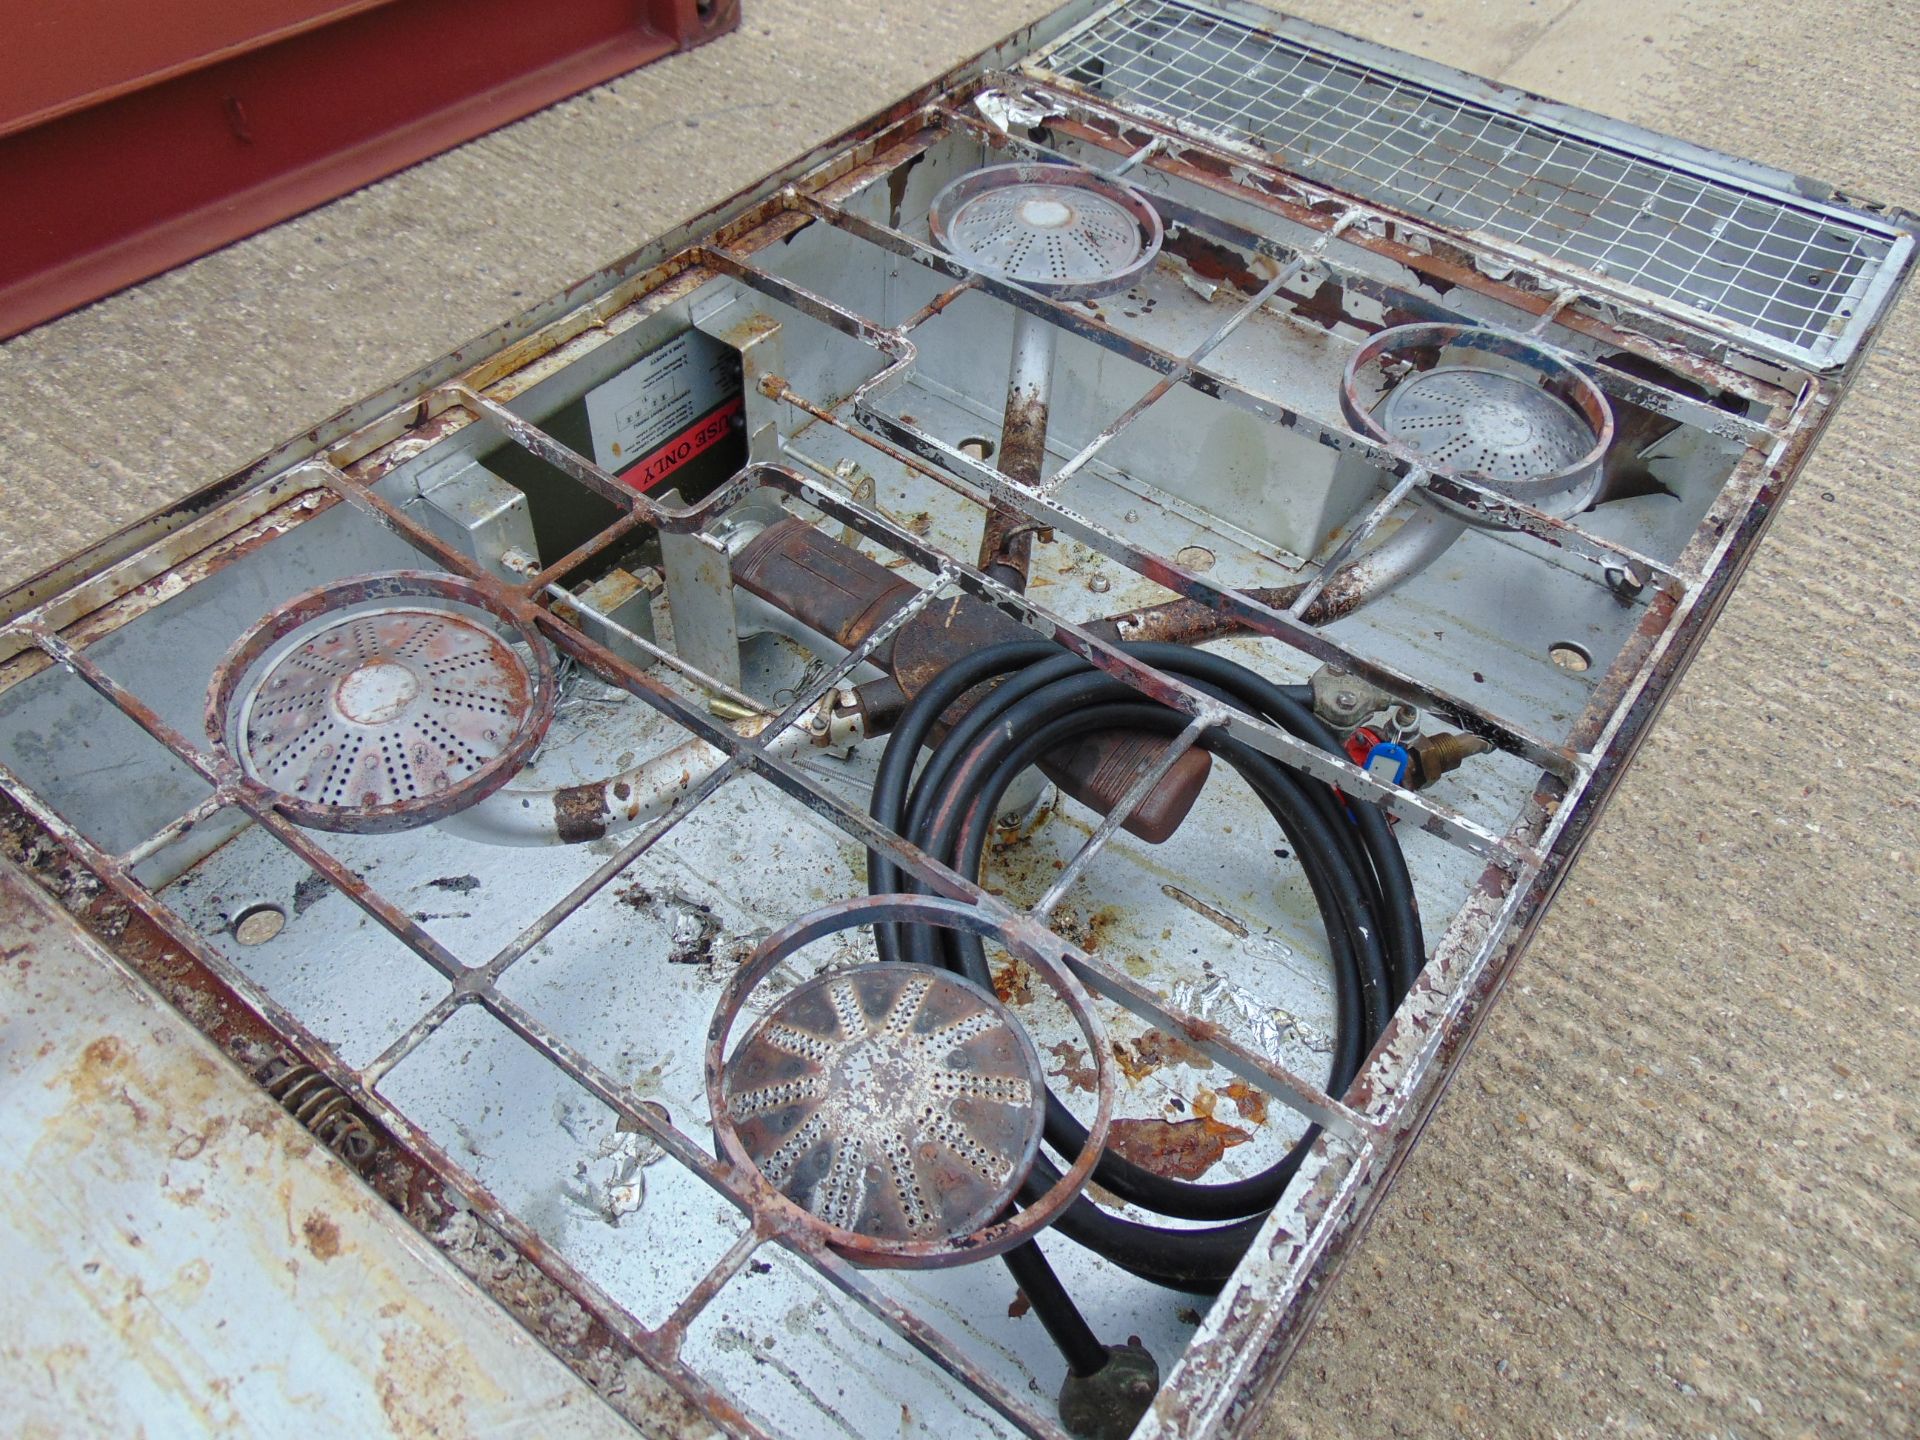 Field Kitchen No5 4 Burner Propane Cooking Stove - Image 3 of 9